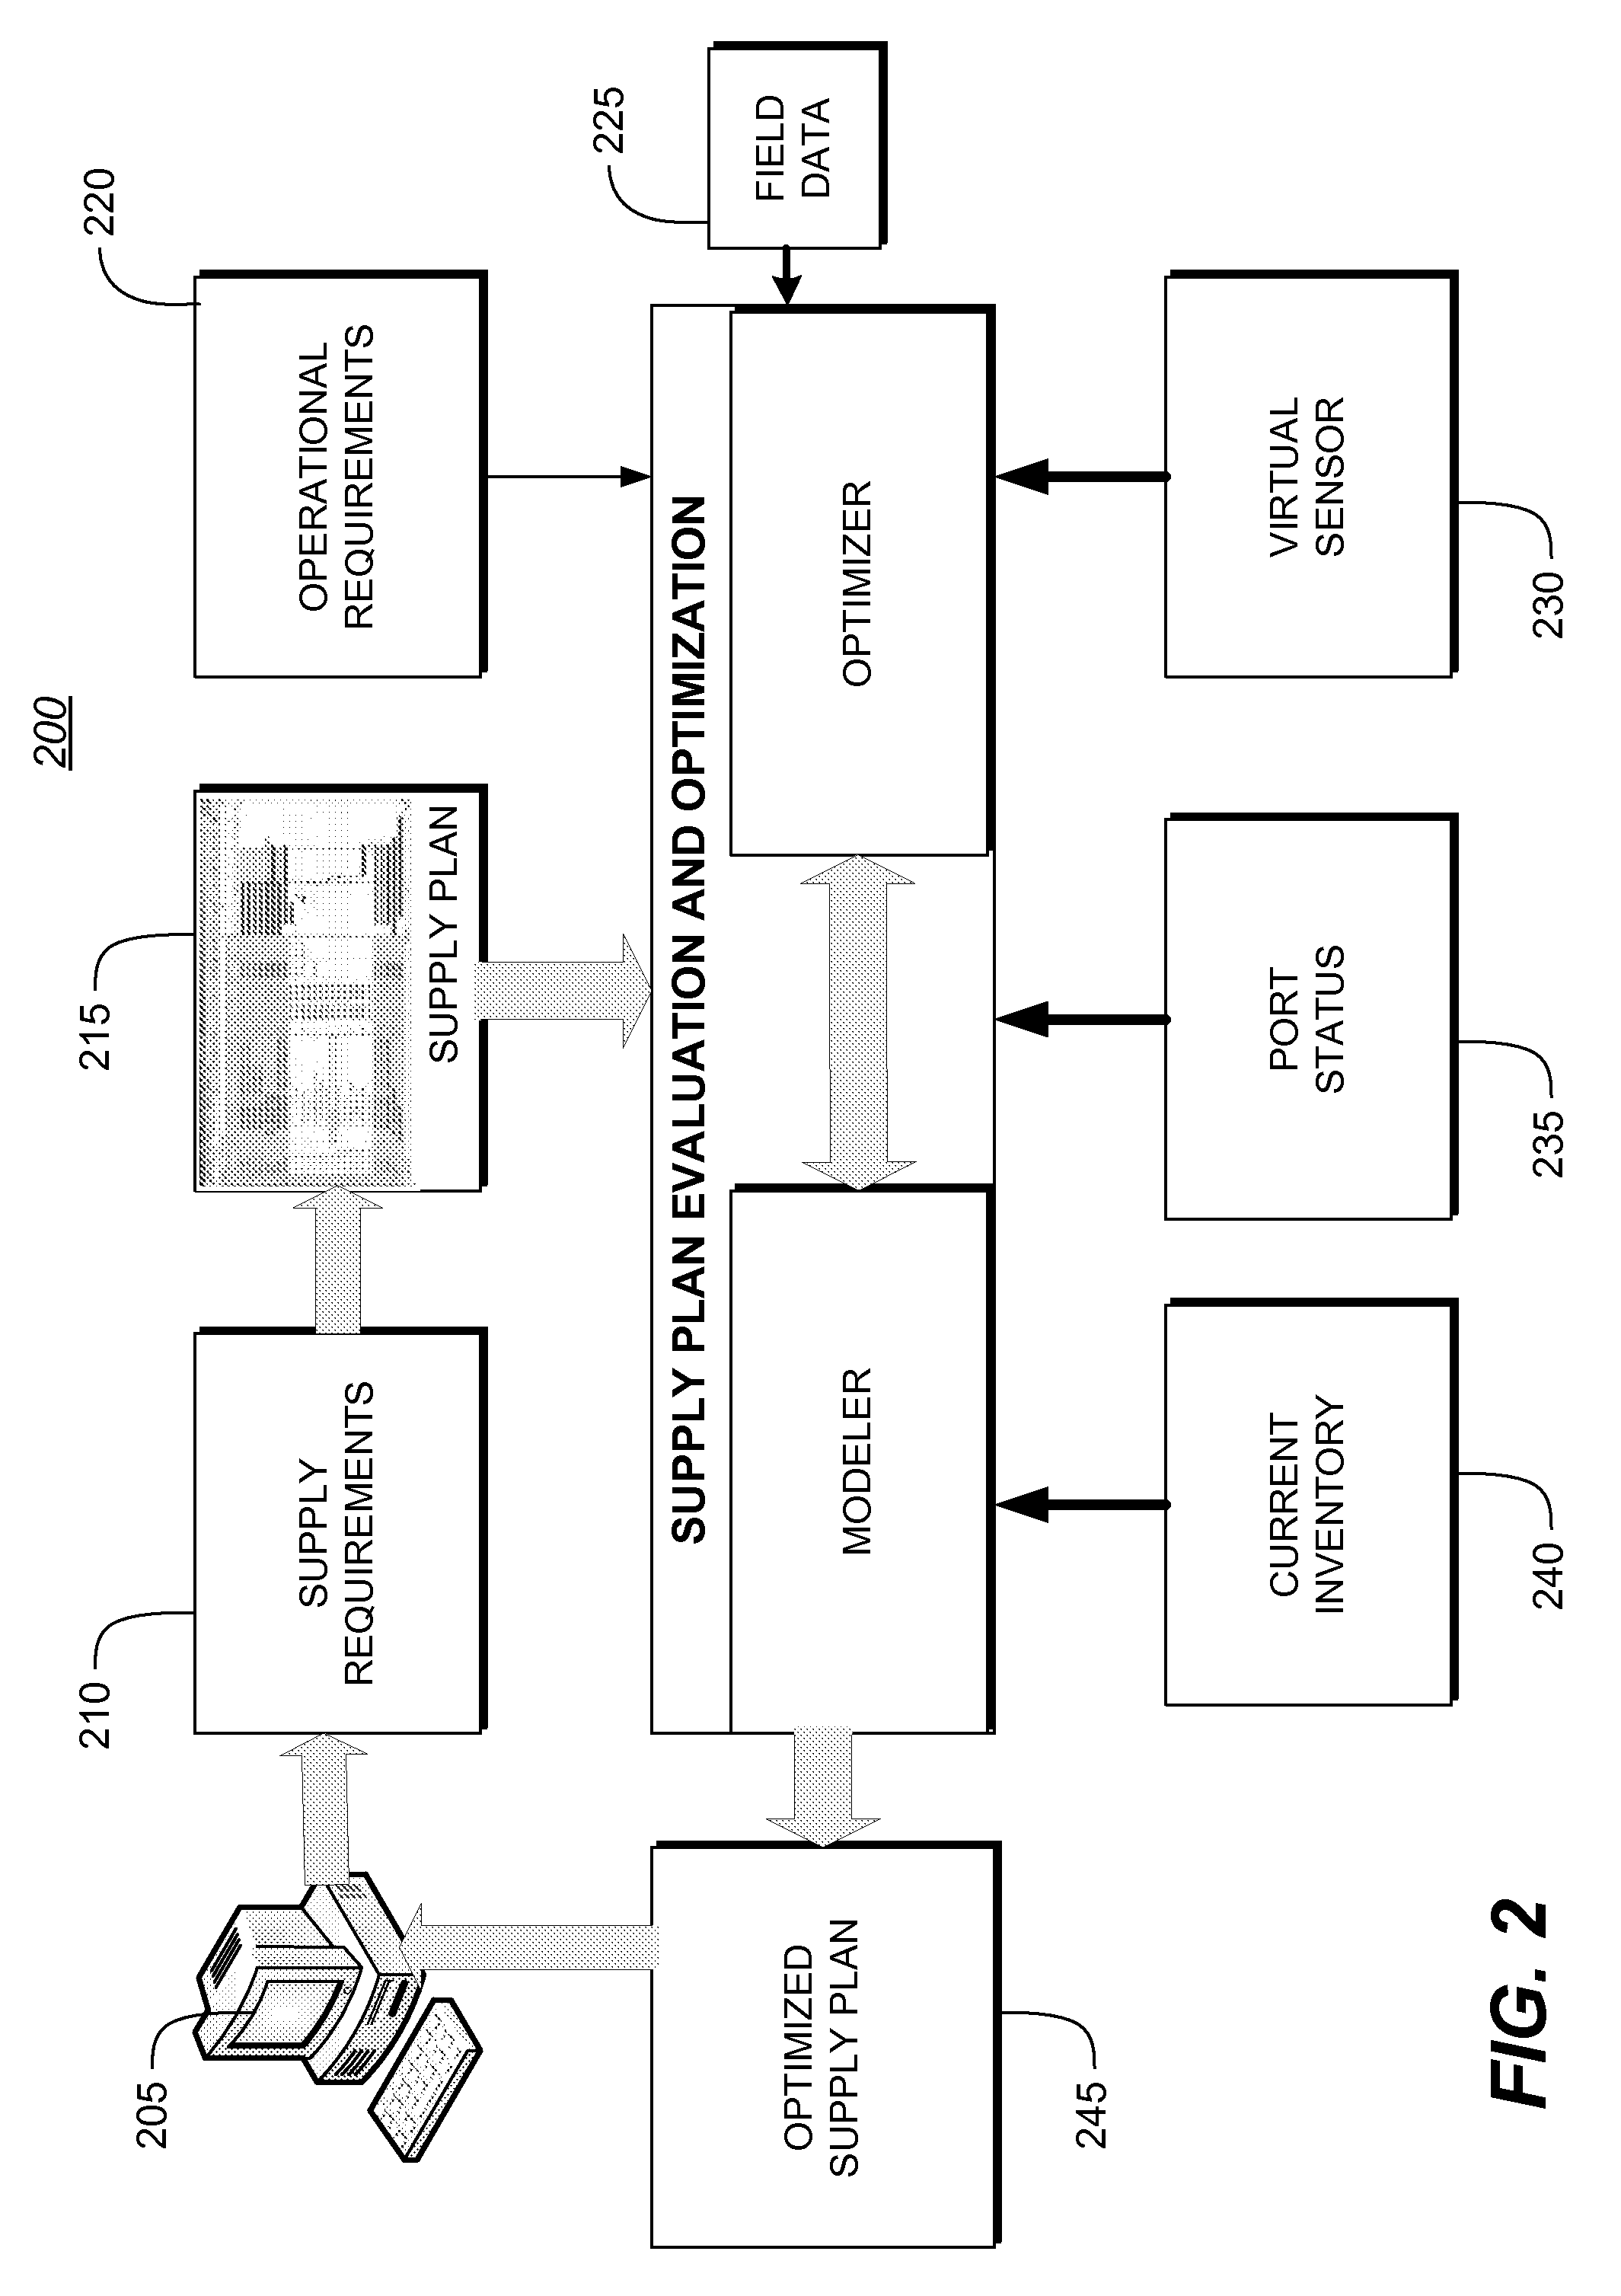 Systems, methods and apparatus for implementing hybrid meta-heuristic inventory optimization based on production schedule and asset routing